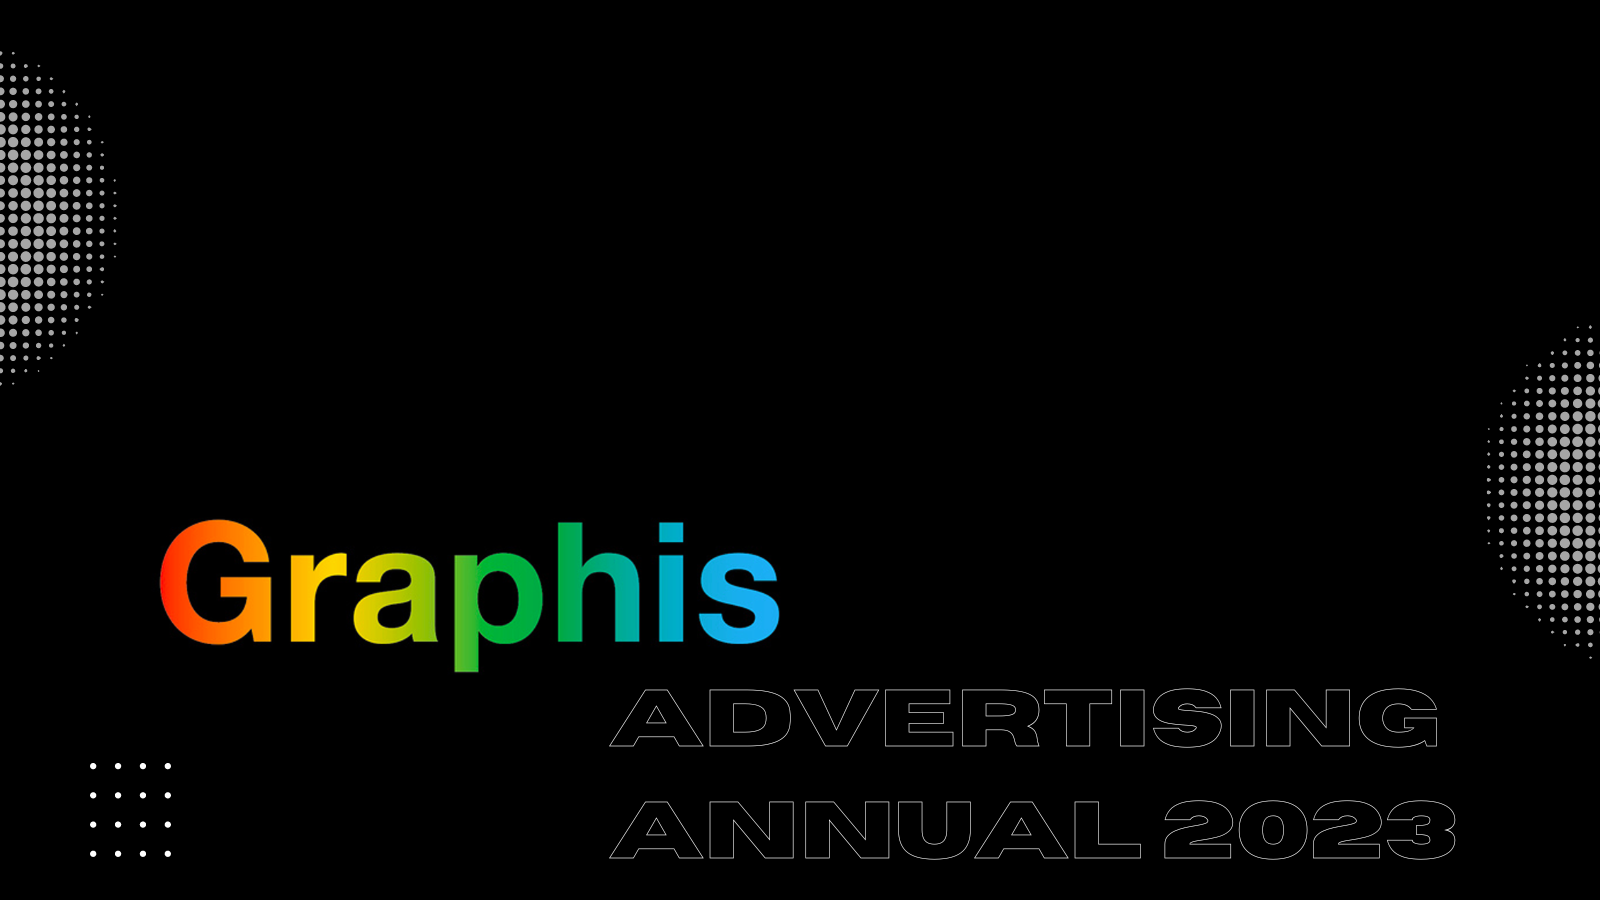 Graphis Advertising Annual Winners